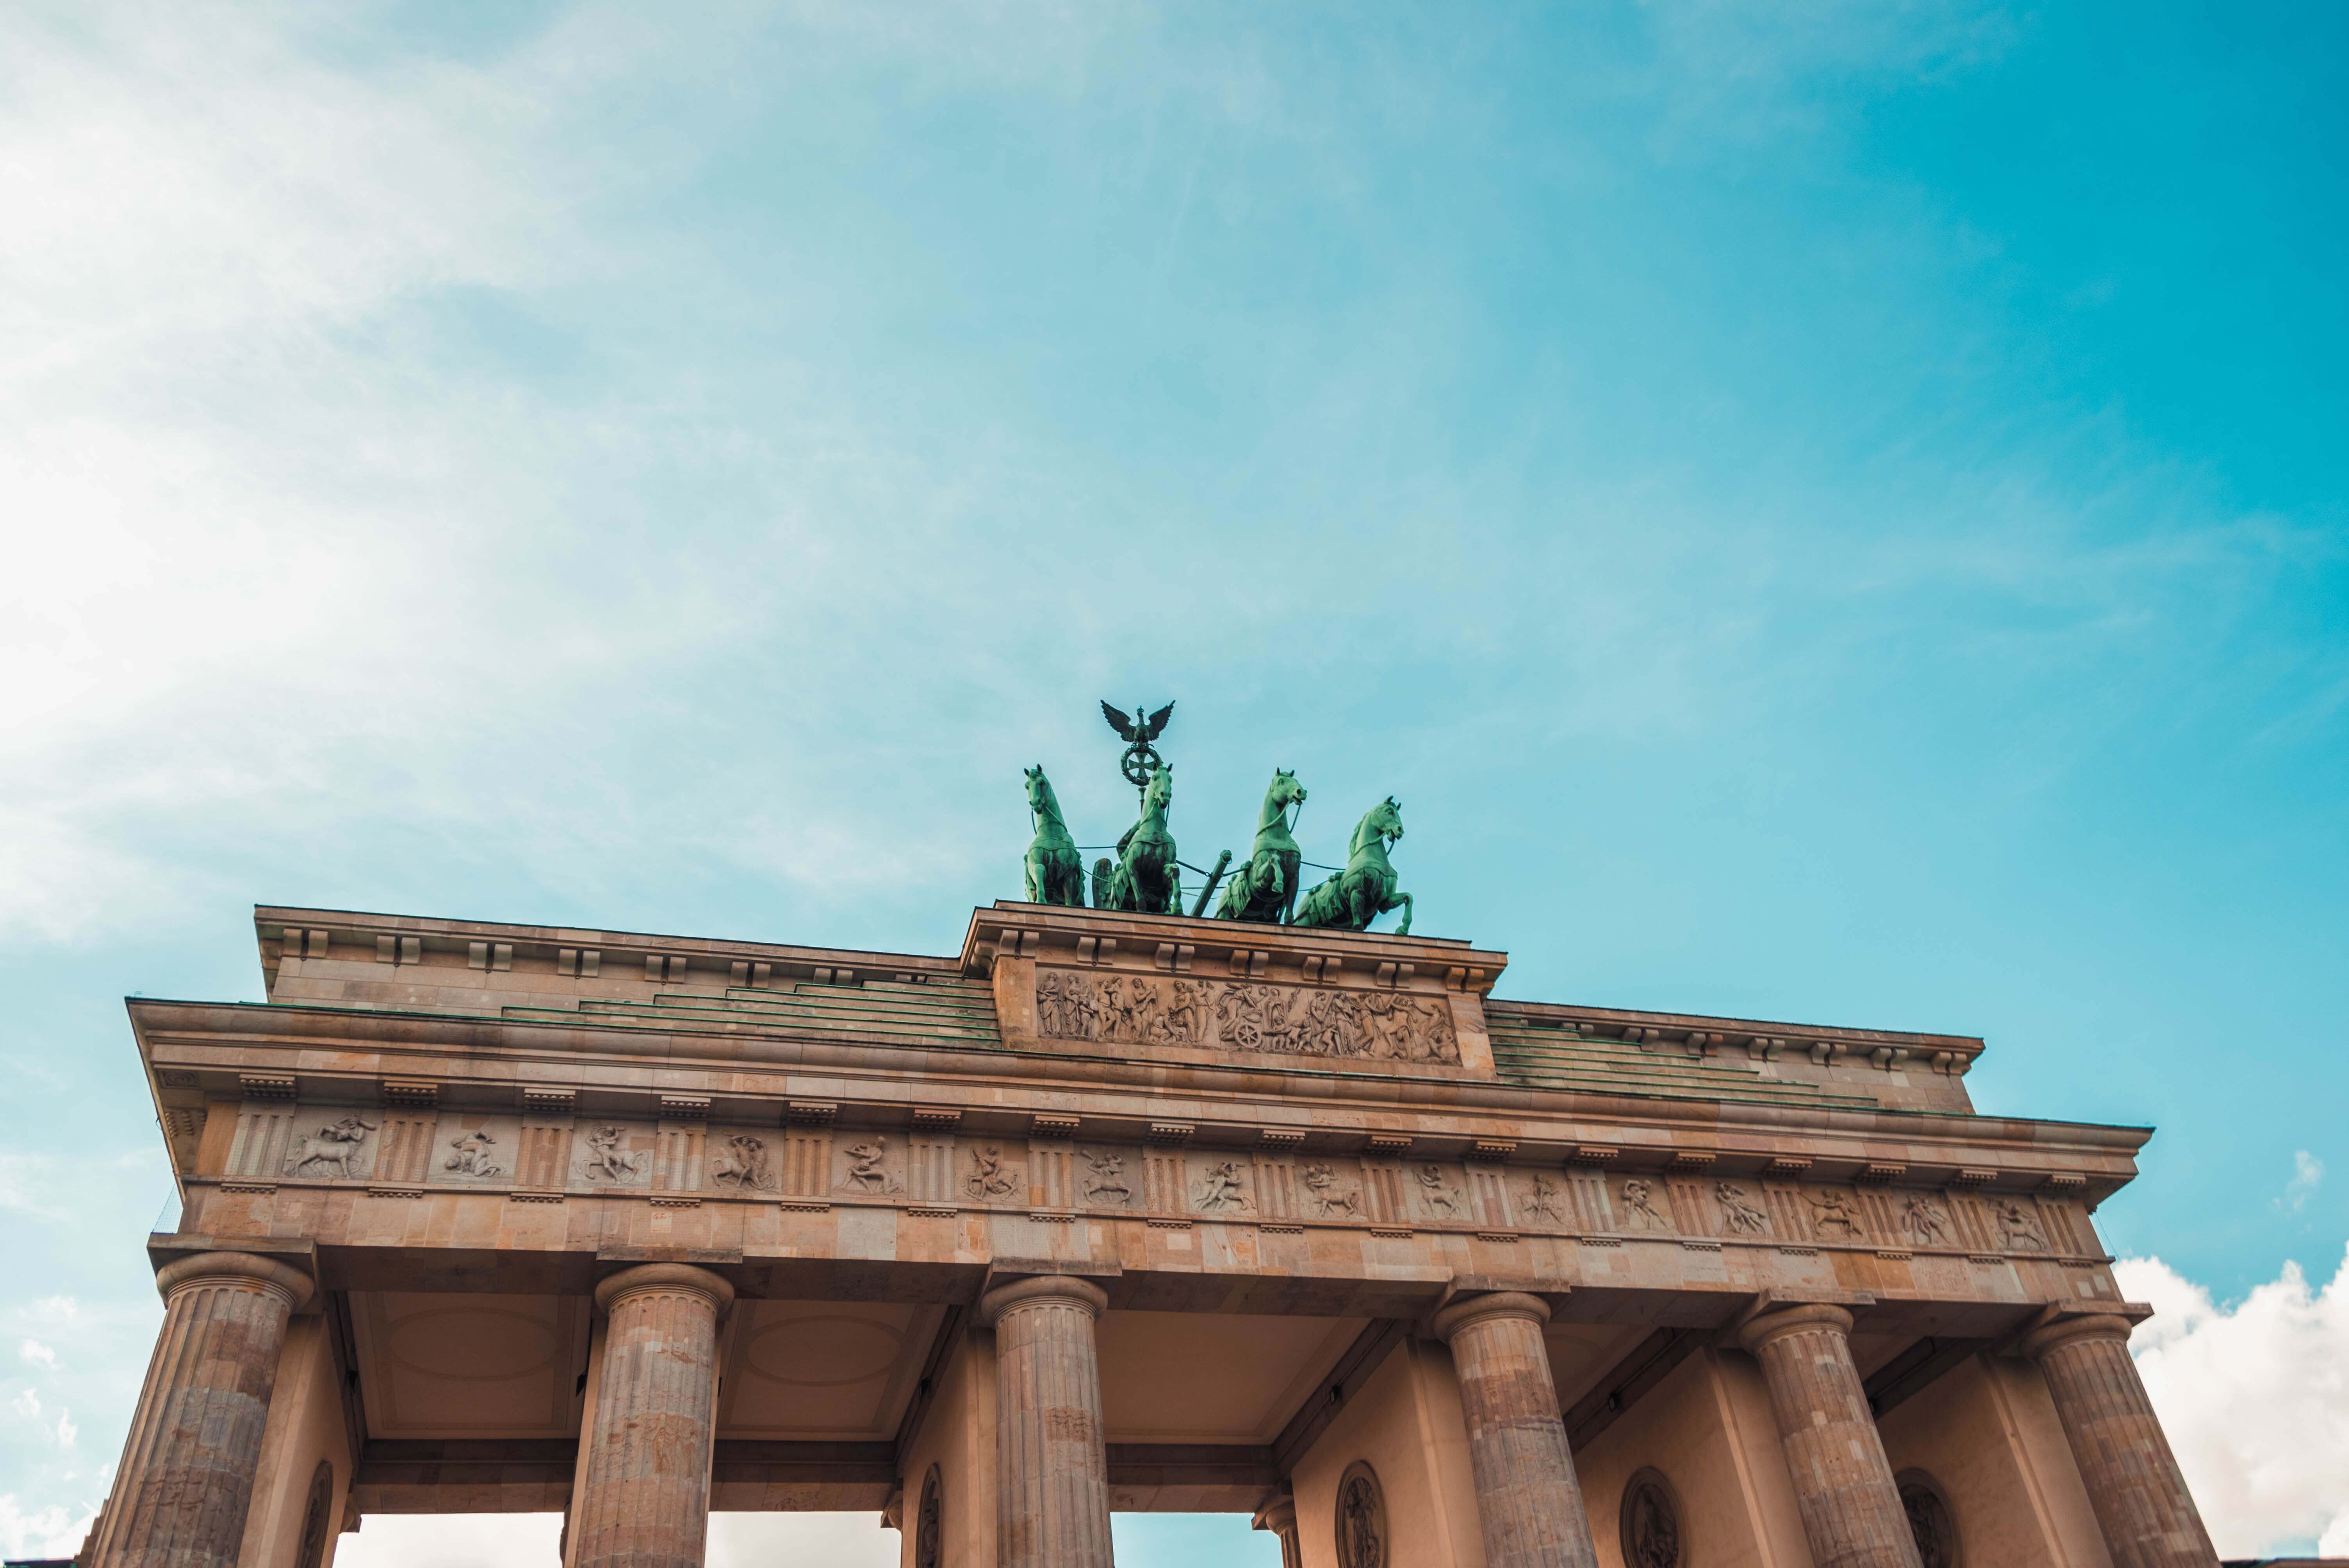 The Brandenburg Gate in Berlin, Germany, under a clear blue sky, featuring classical columns and a quadriga sculpture of a chariot drawn by four horses on top, perfect for your Instagram scheduler | plannthat.com